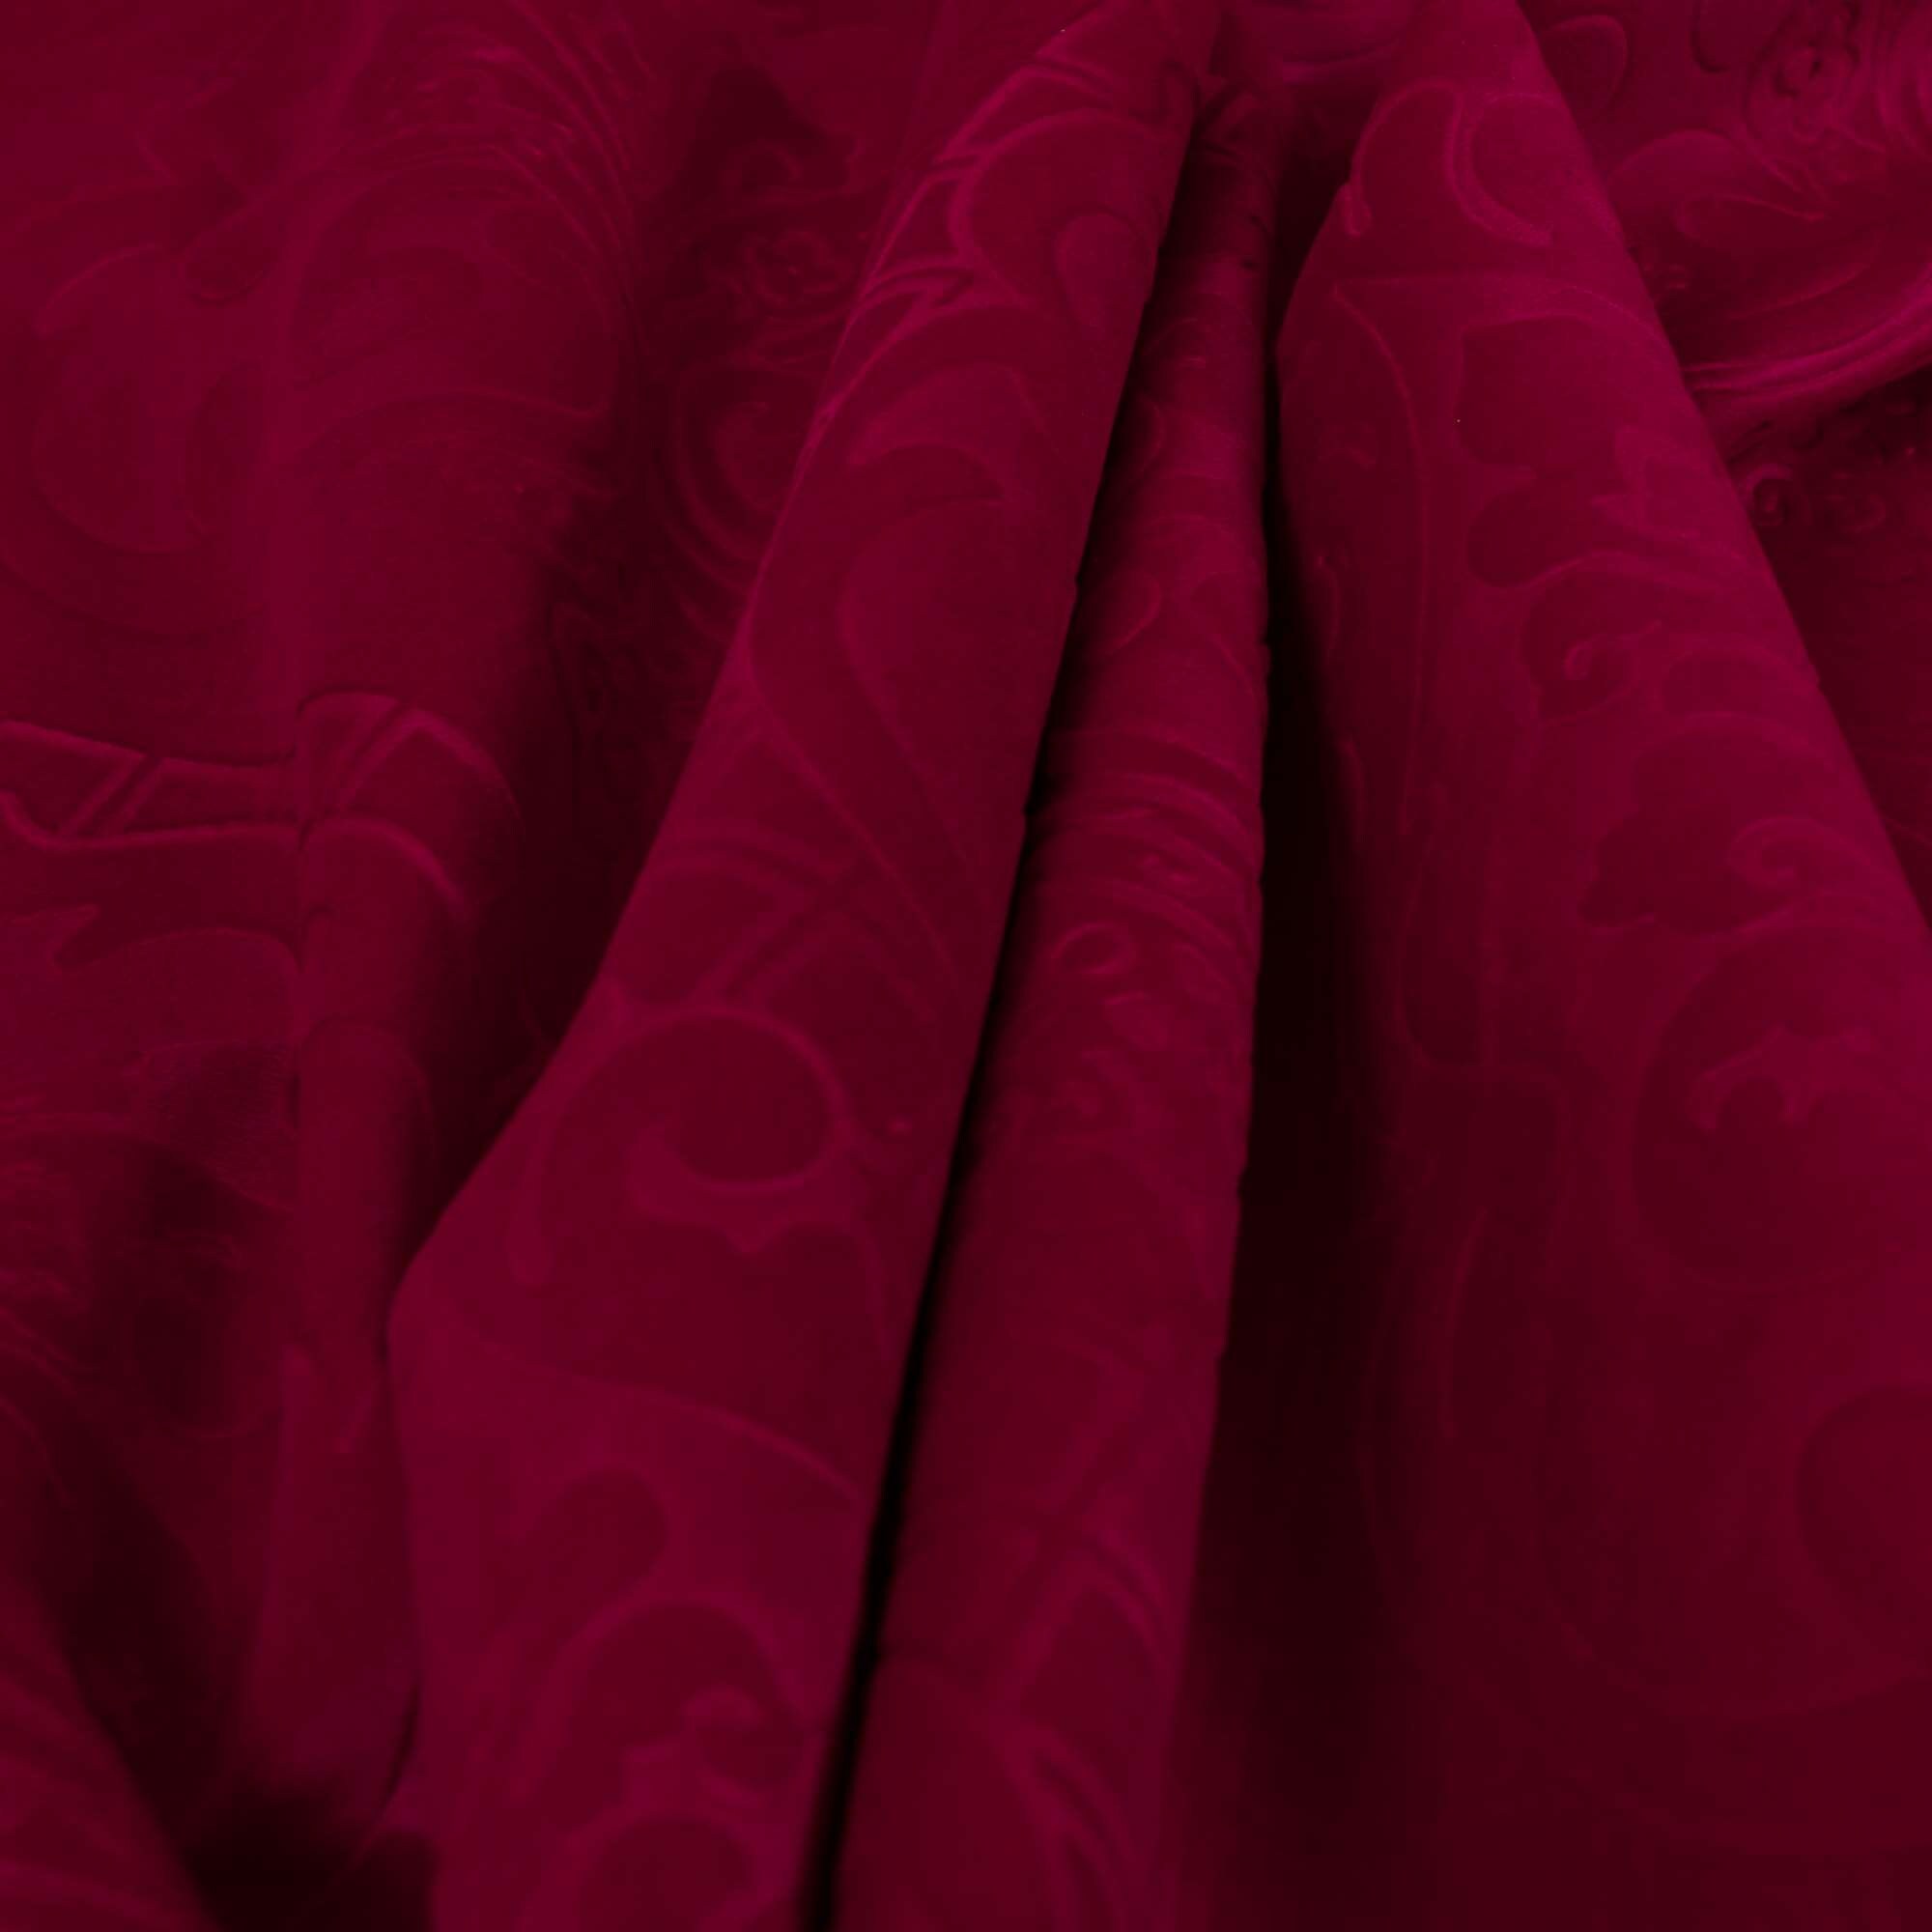 Upholstery Wine Red Velvet Fabric, Fabric by the Yard, Curtain Fabrics,  Pillow Fabric, Furniture Chair Fabrics, Velvet Fabric by the Yard 